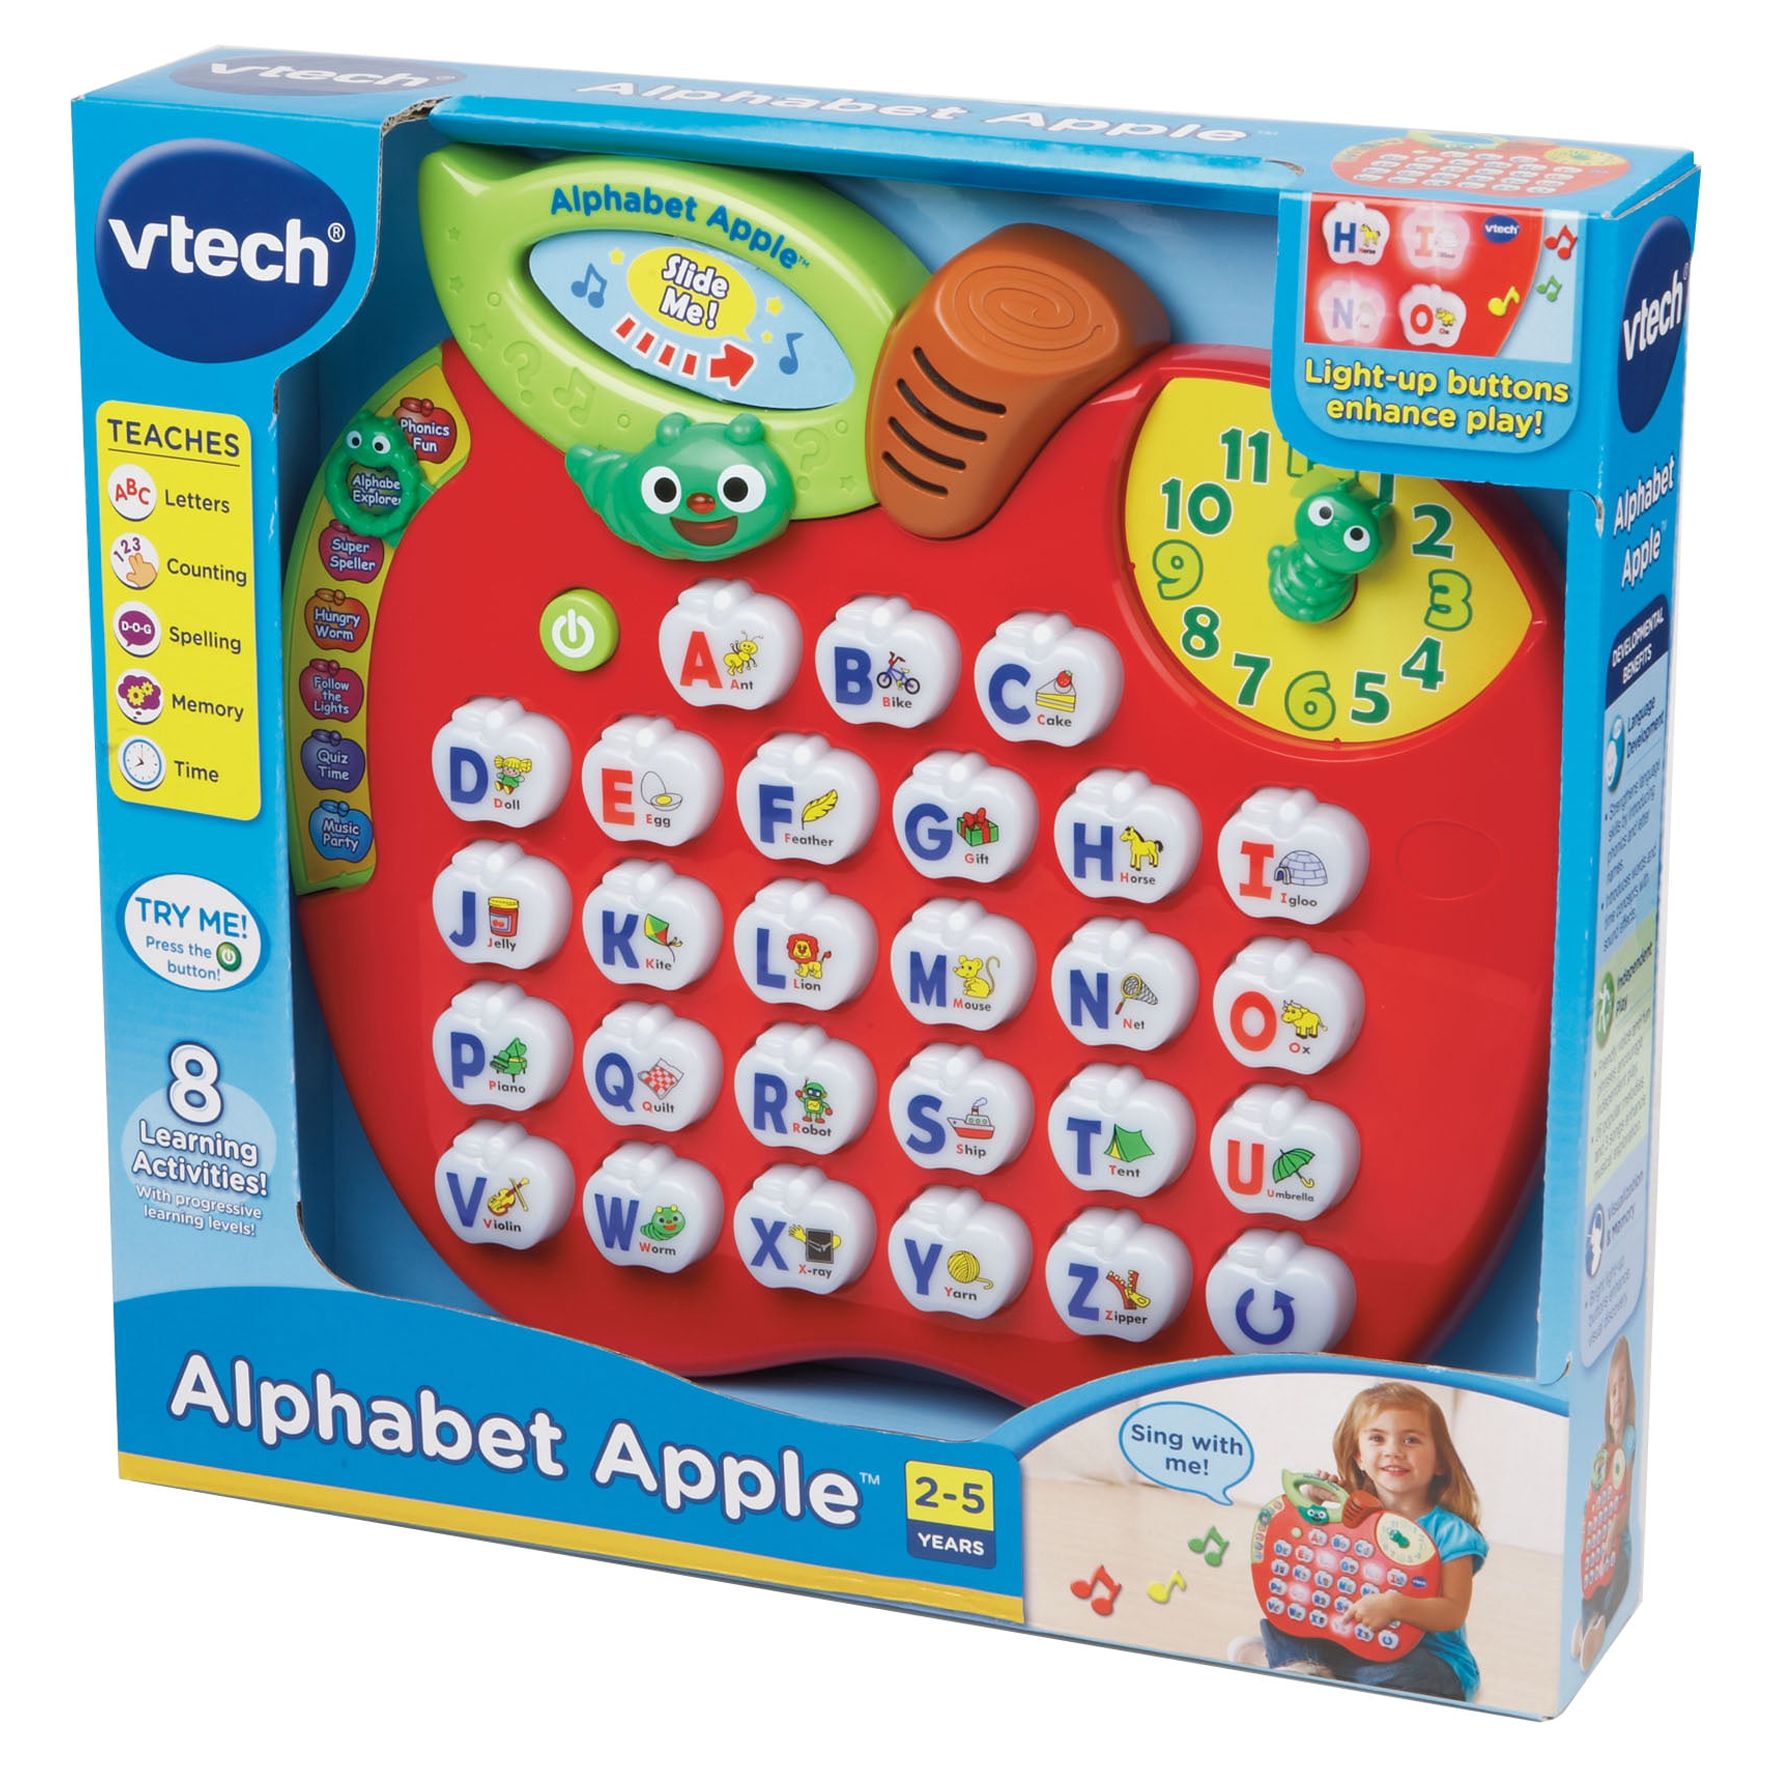 VTech, Alphabet Apple, ABC Learning Toy, Preschool Toy - image 5 of 5